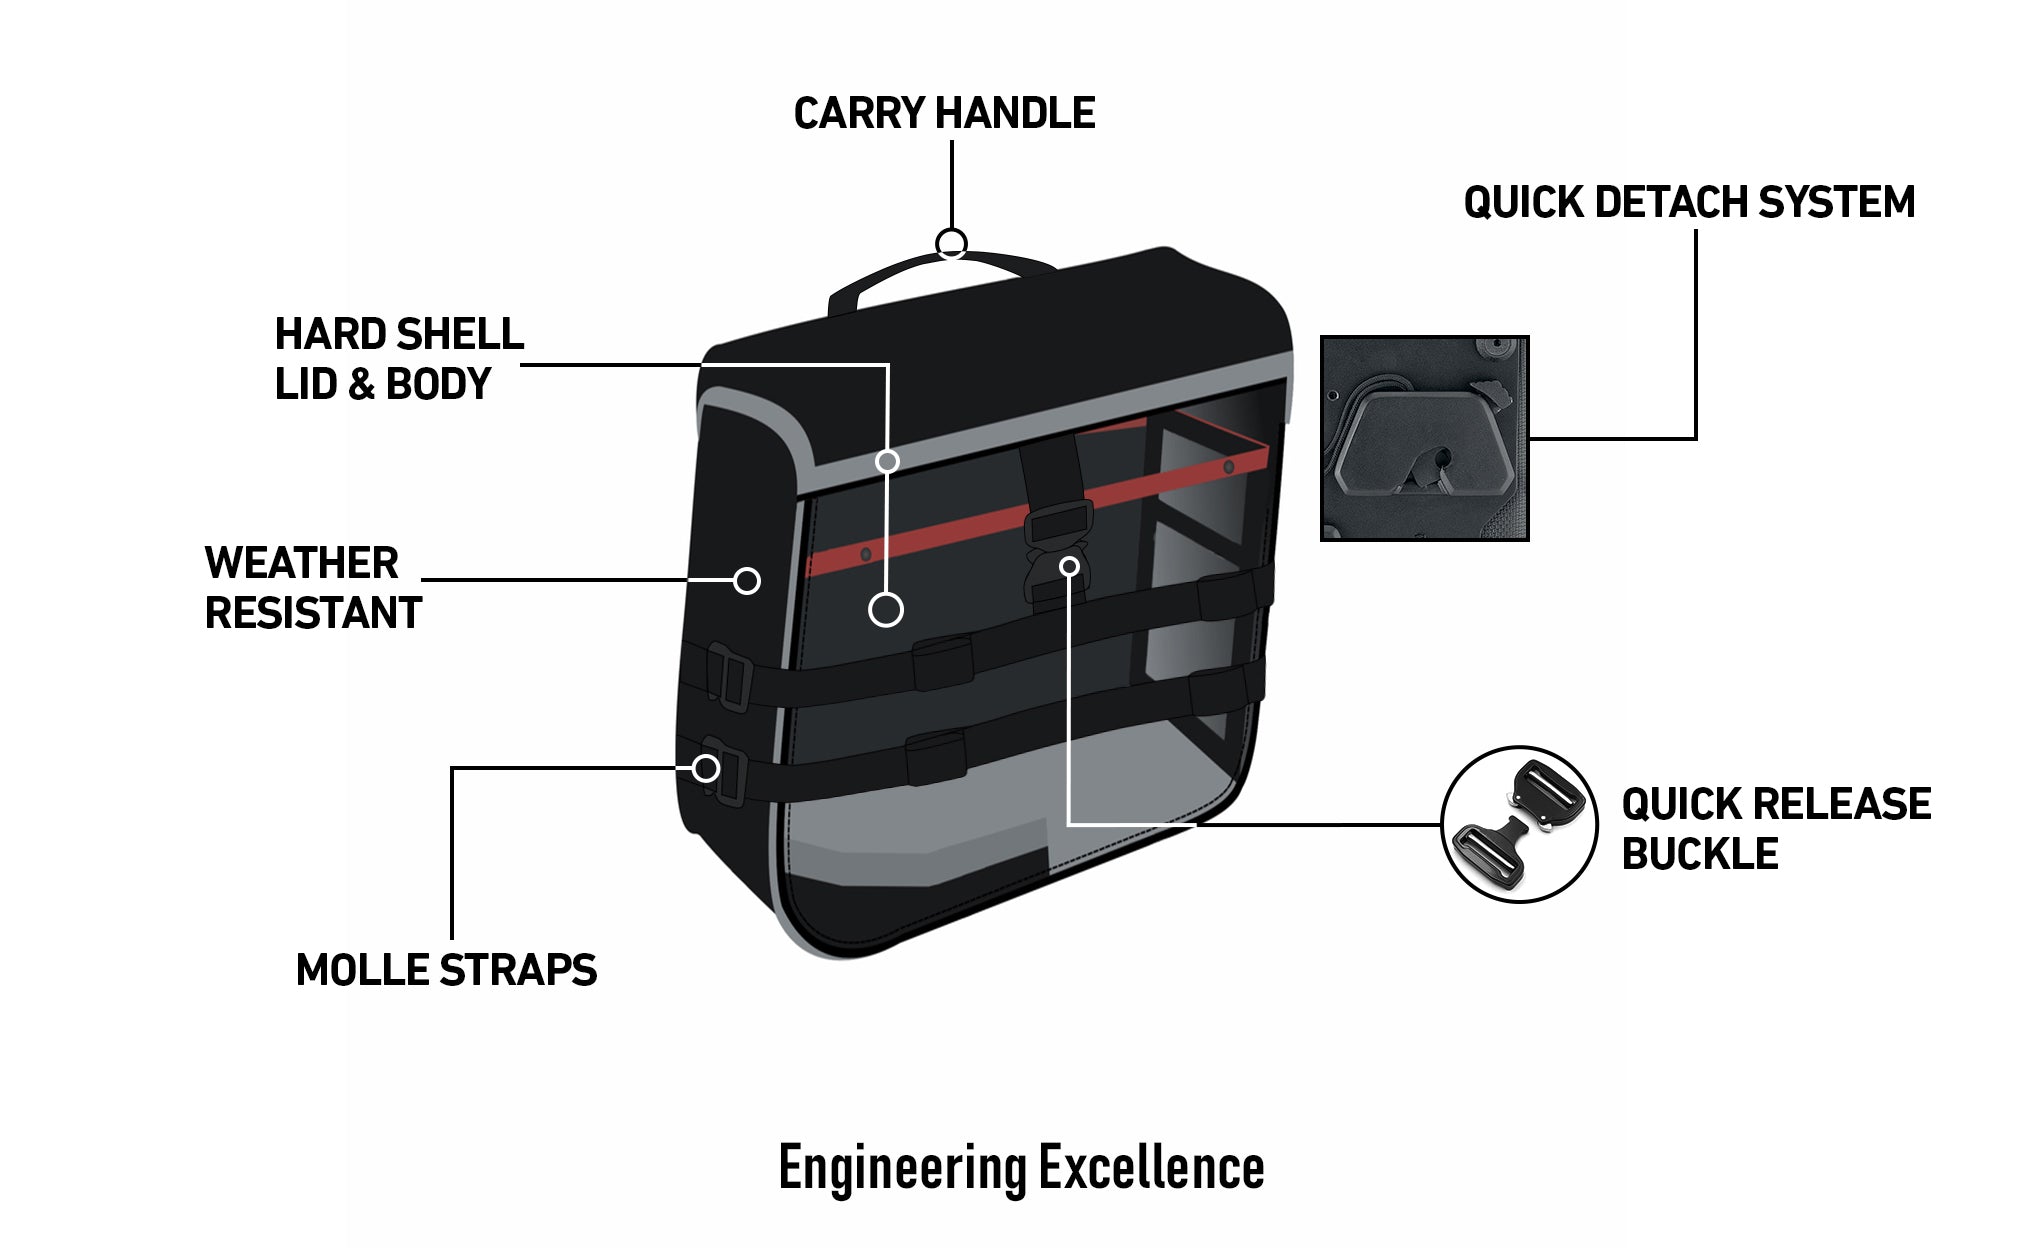 Viking Incognito Detachable Small Solo Motorcycle Saddlebag For Harley Sportster 883 Iron Xl883N Engineering Excellence with Bag on Bike @expand